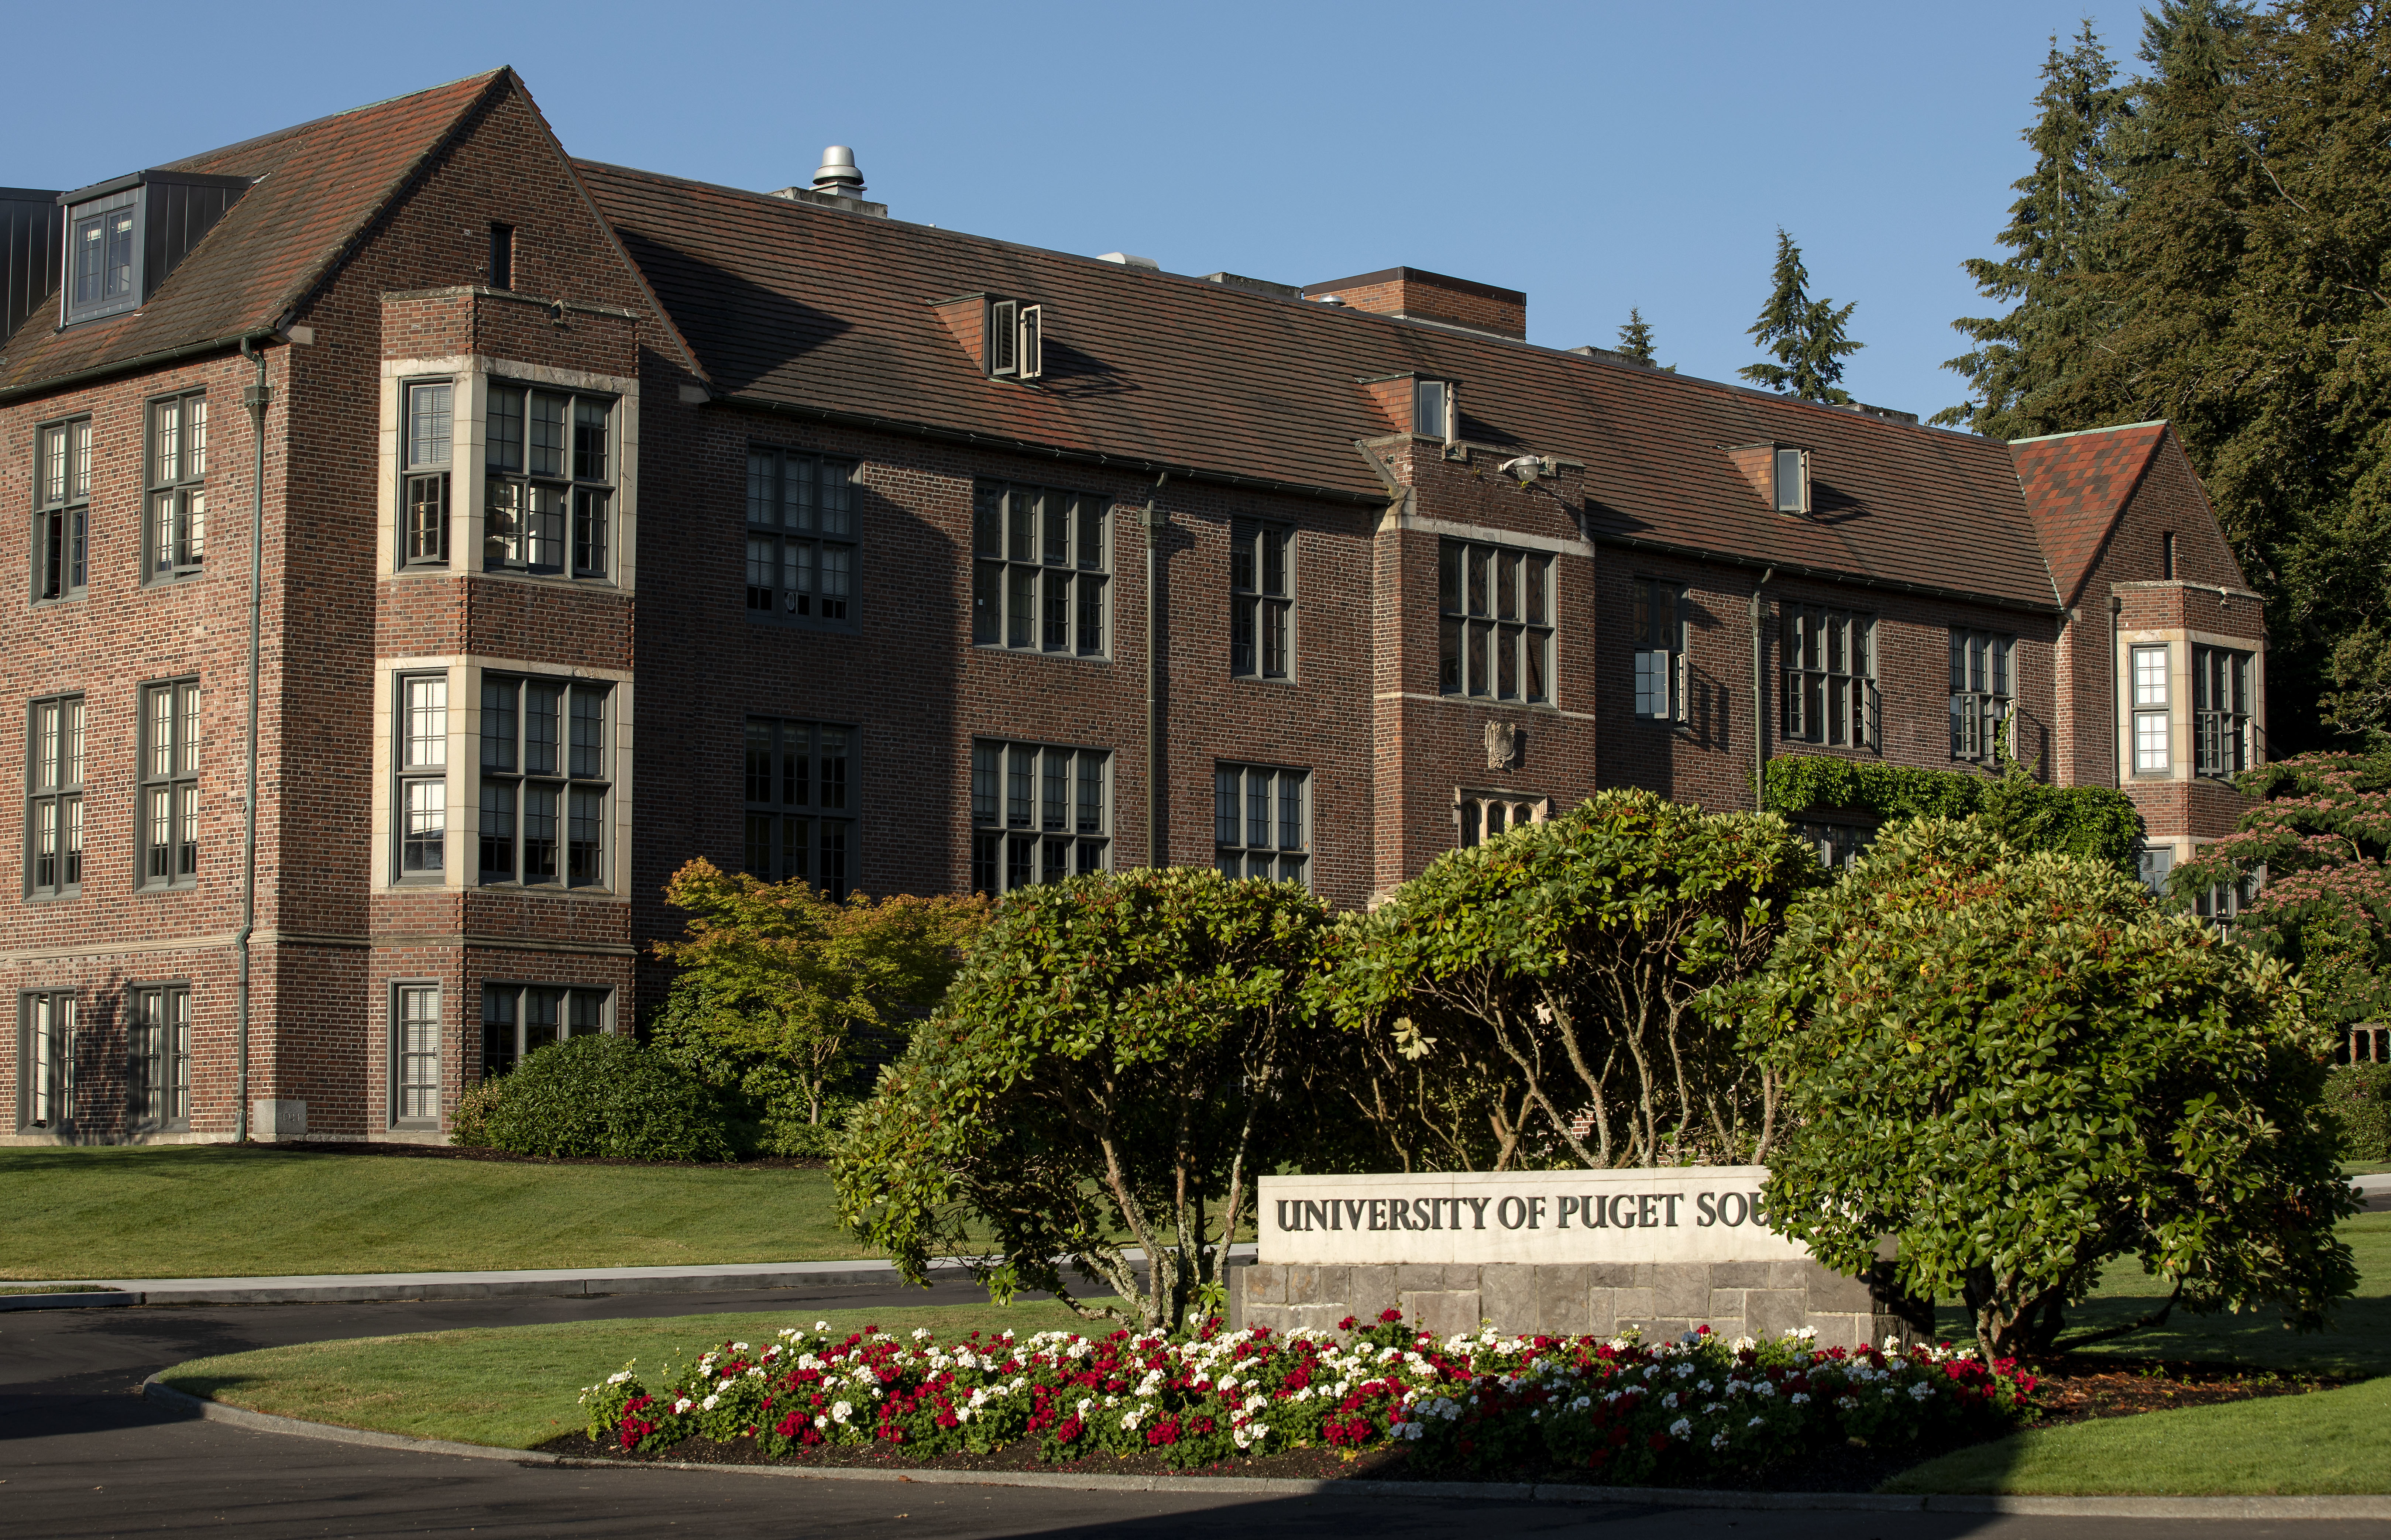 The University of Puget Sound sign sits behind flowers in front of a brick building. 